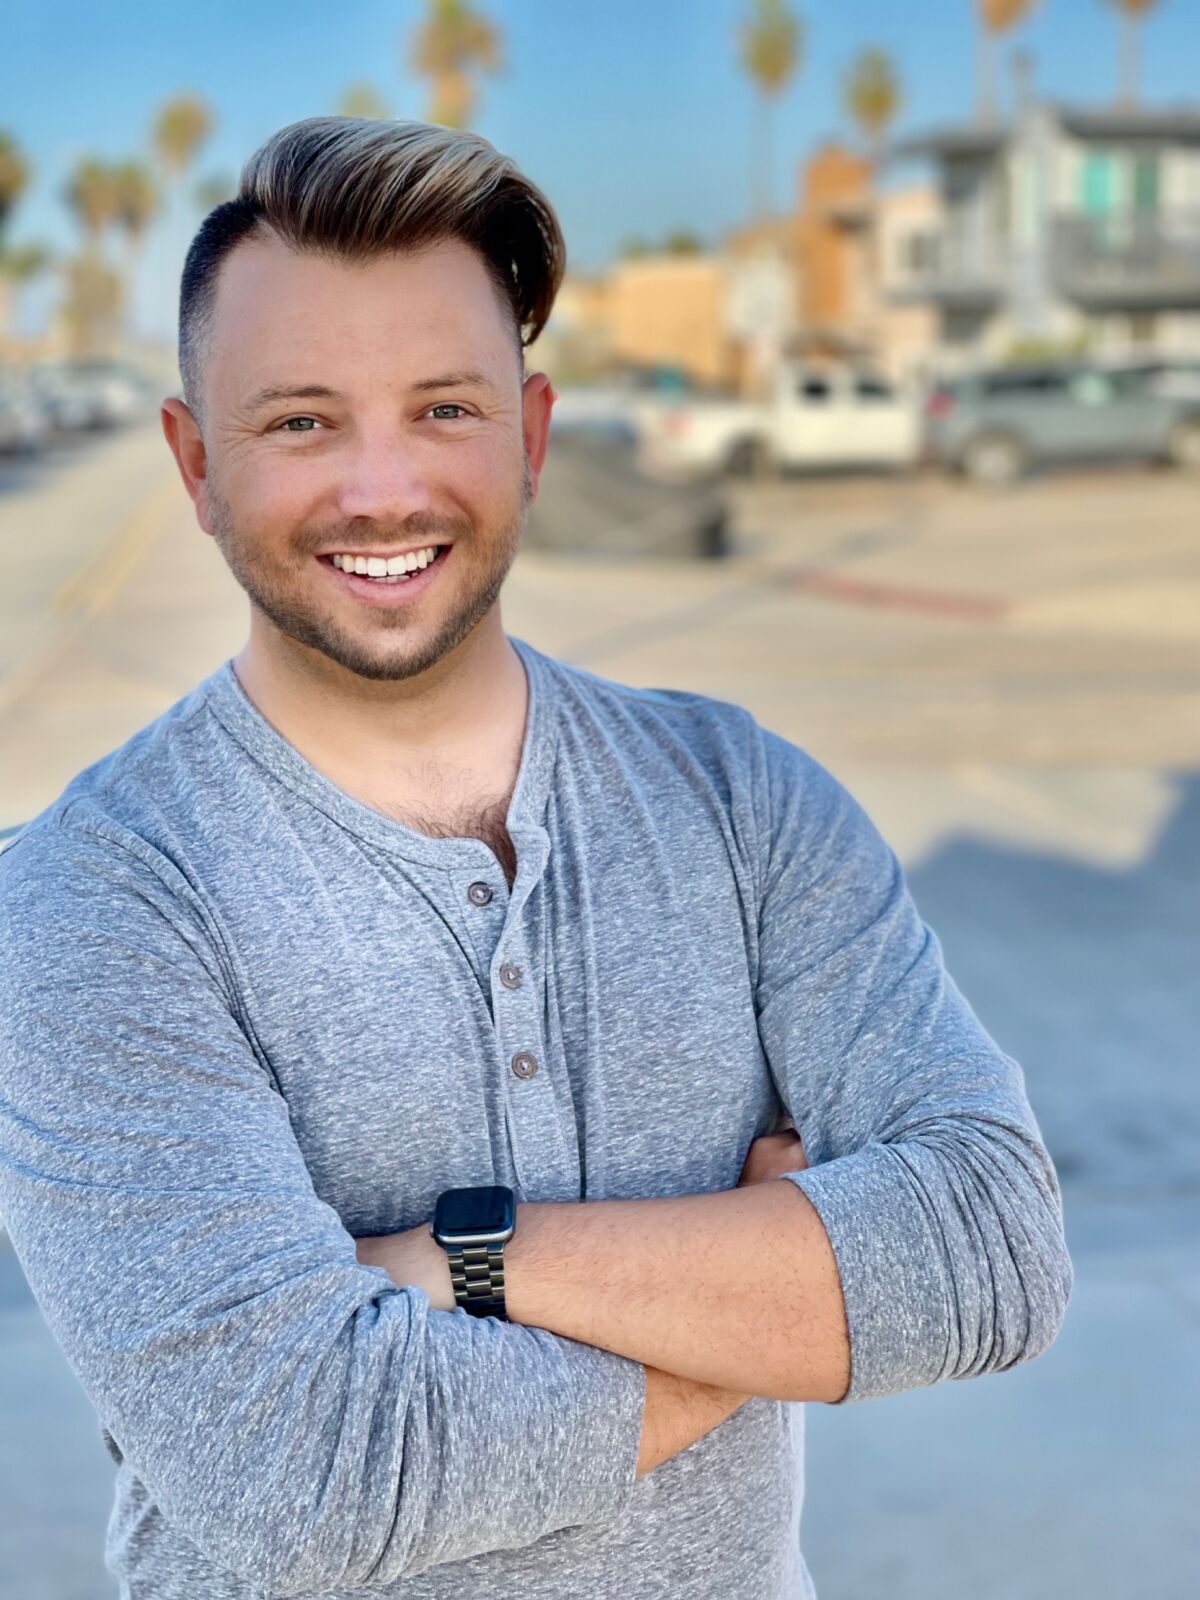 Corey Bruins is an entrepreneur and lifelong San Diegan who was first elected to the Ocean Beach Town Council board in 2015.